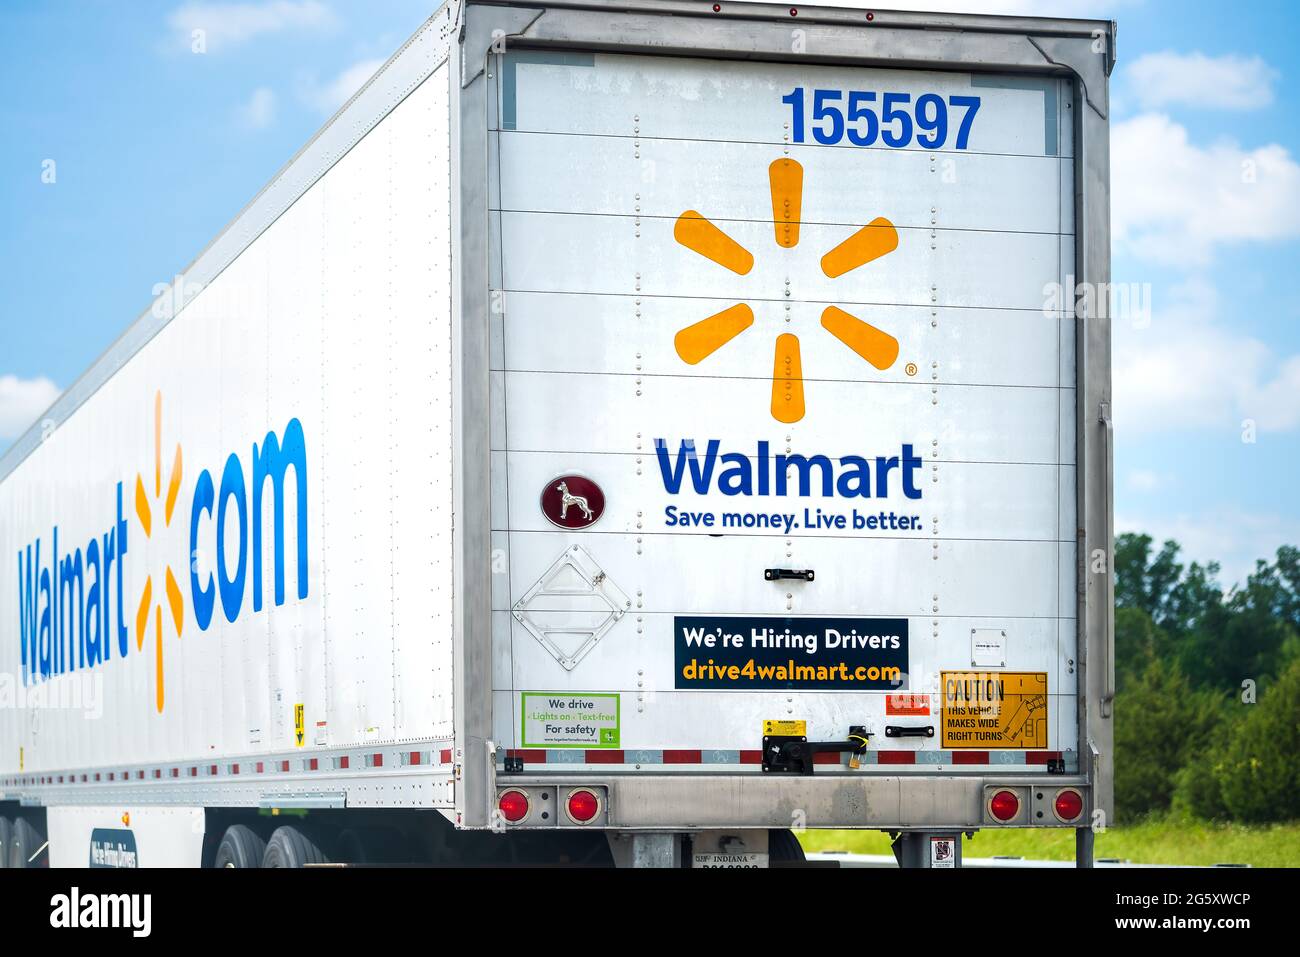 Lexington, USA - May 27, 2021: Highway road in Virginia with truck vehicle for Walmart and sign for hiring drivers application on online website Stock Photo